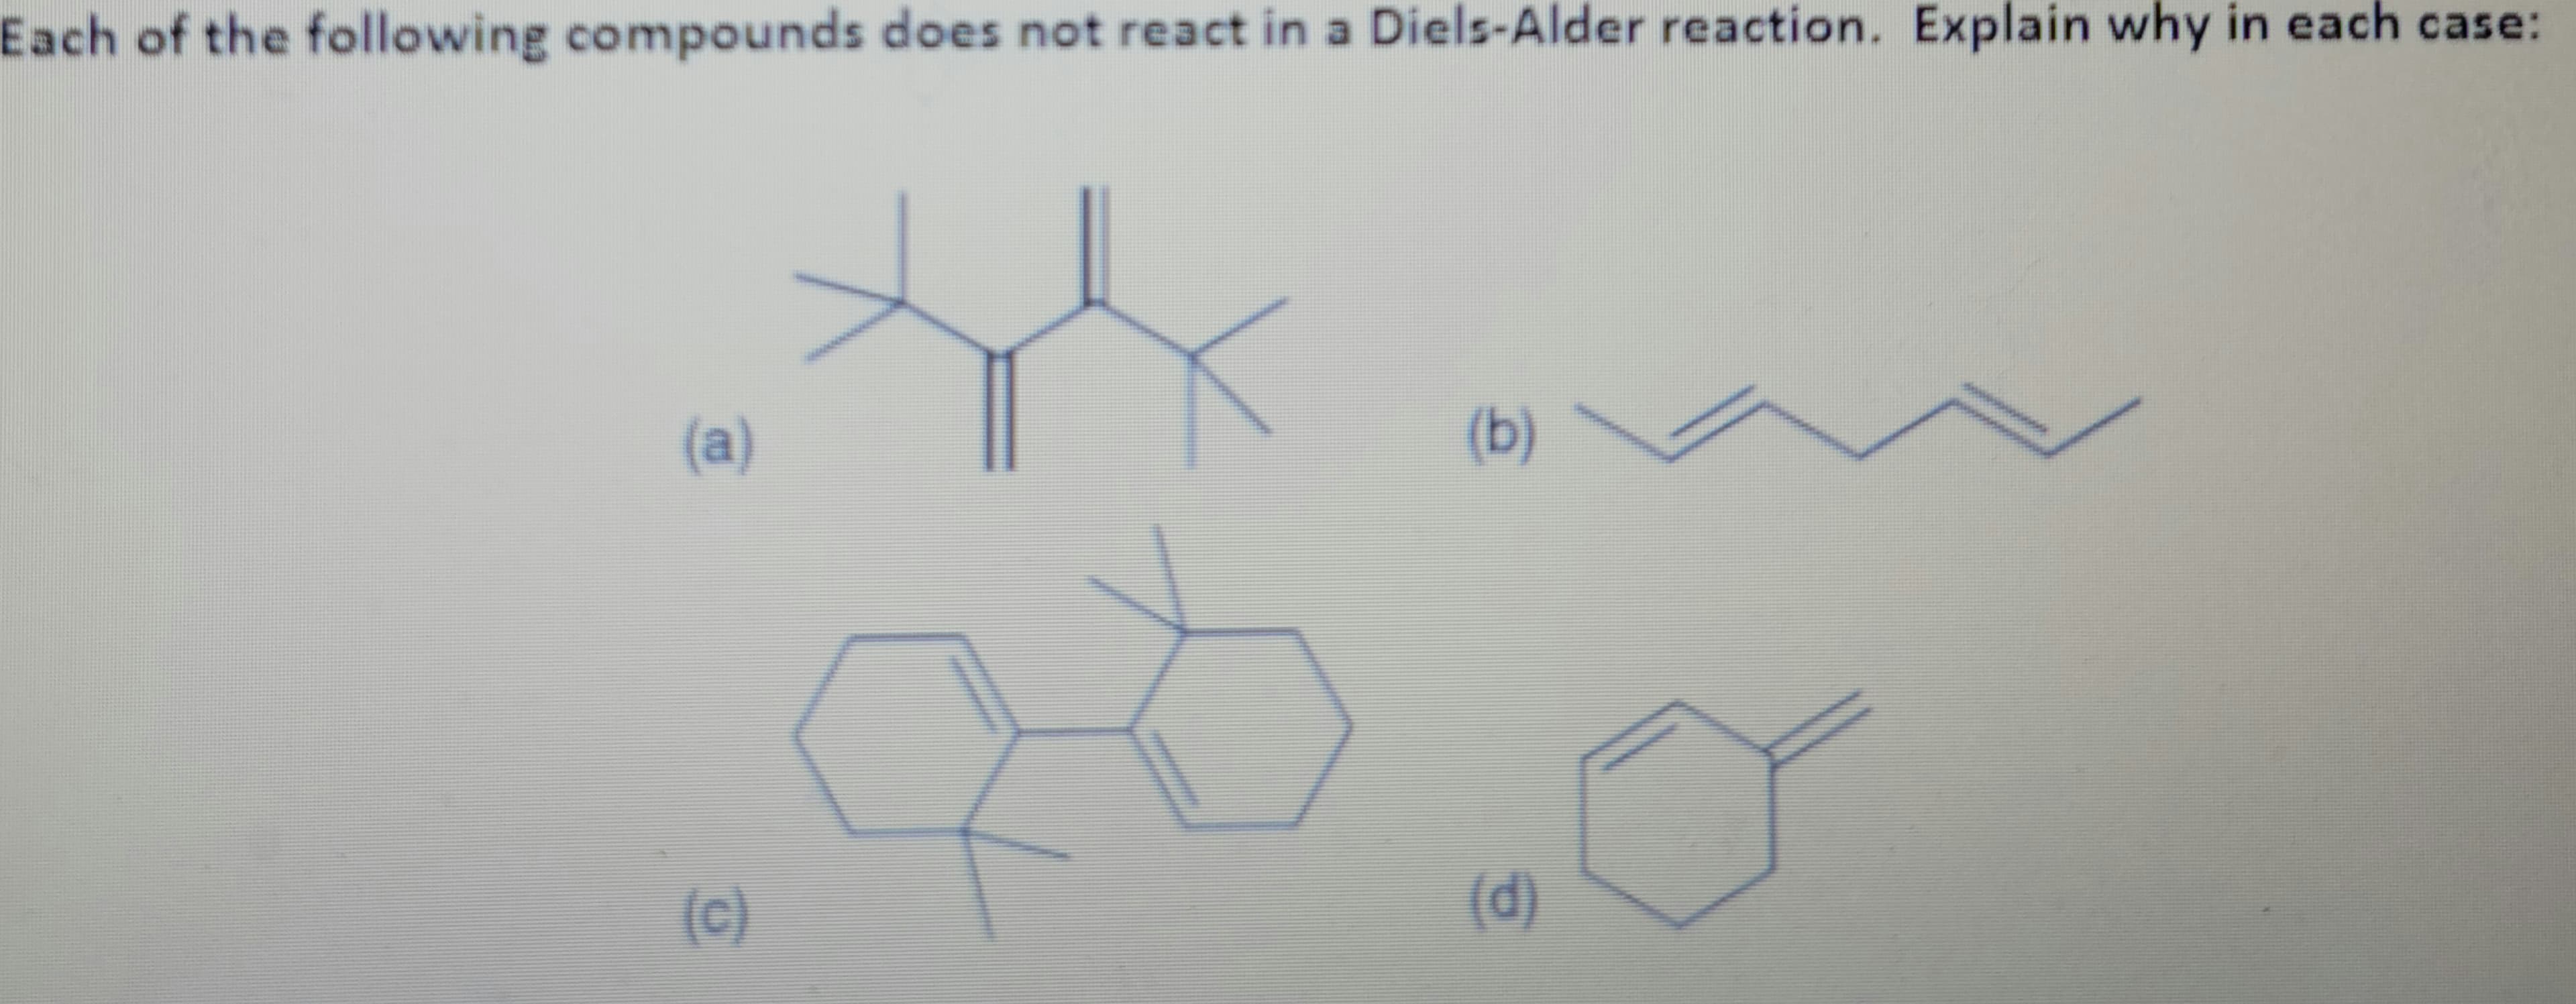 Each of the following compounds does not react in a Diels-Alder reaction. Explain why in each case:
(a)
(c)
y
(b)
(d)